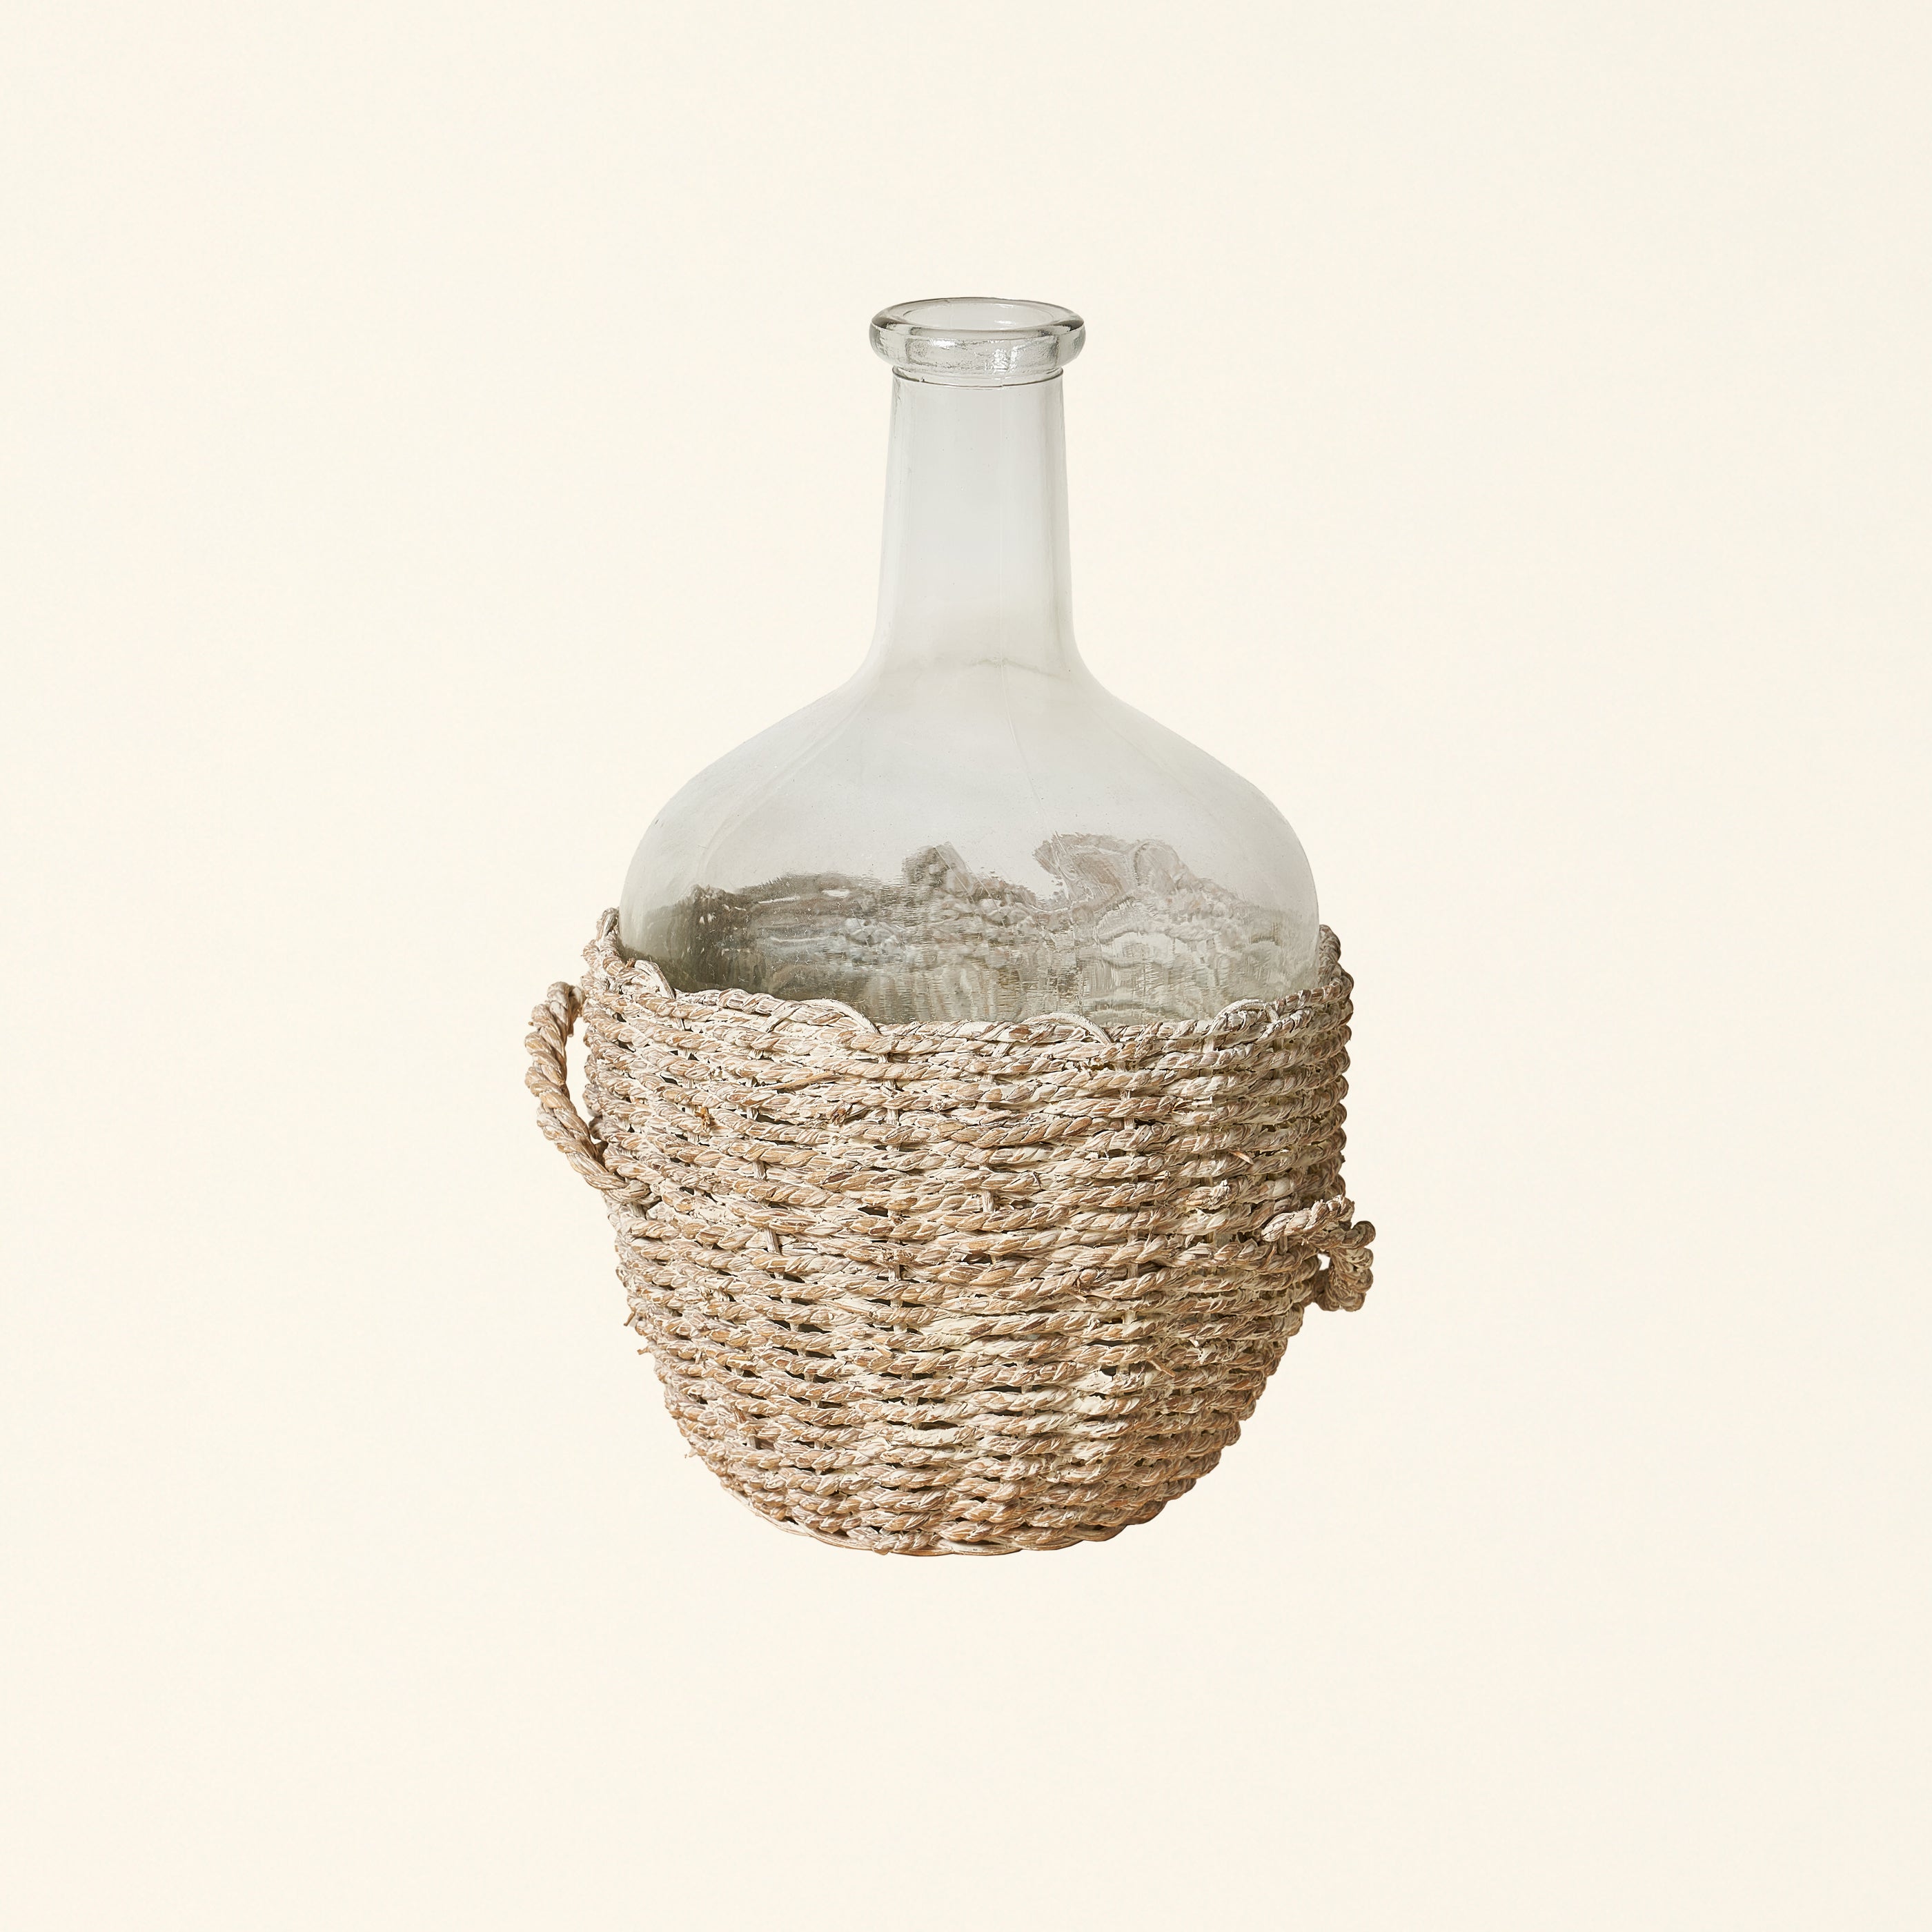 Woven Seagrass Wrapped Bottle